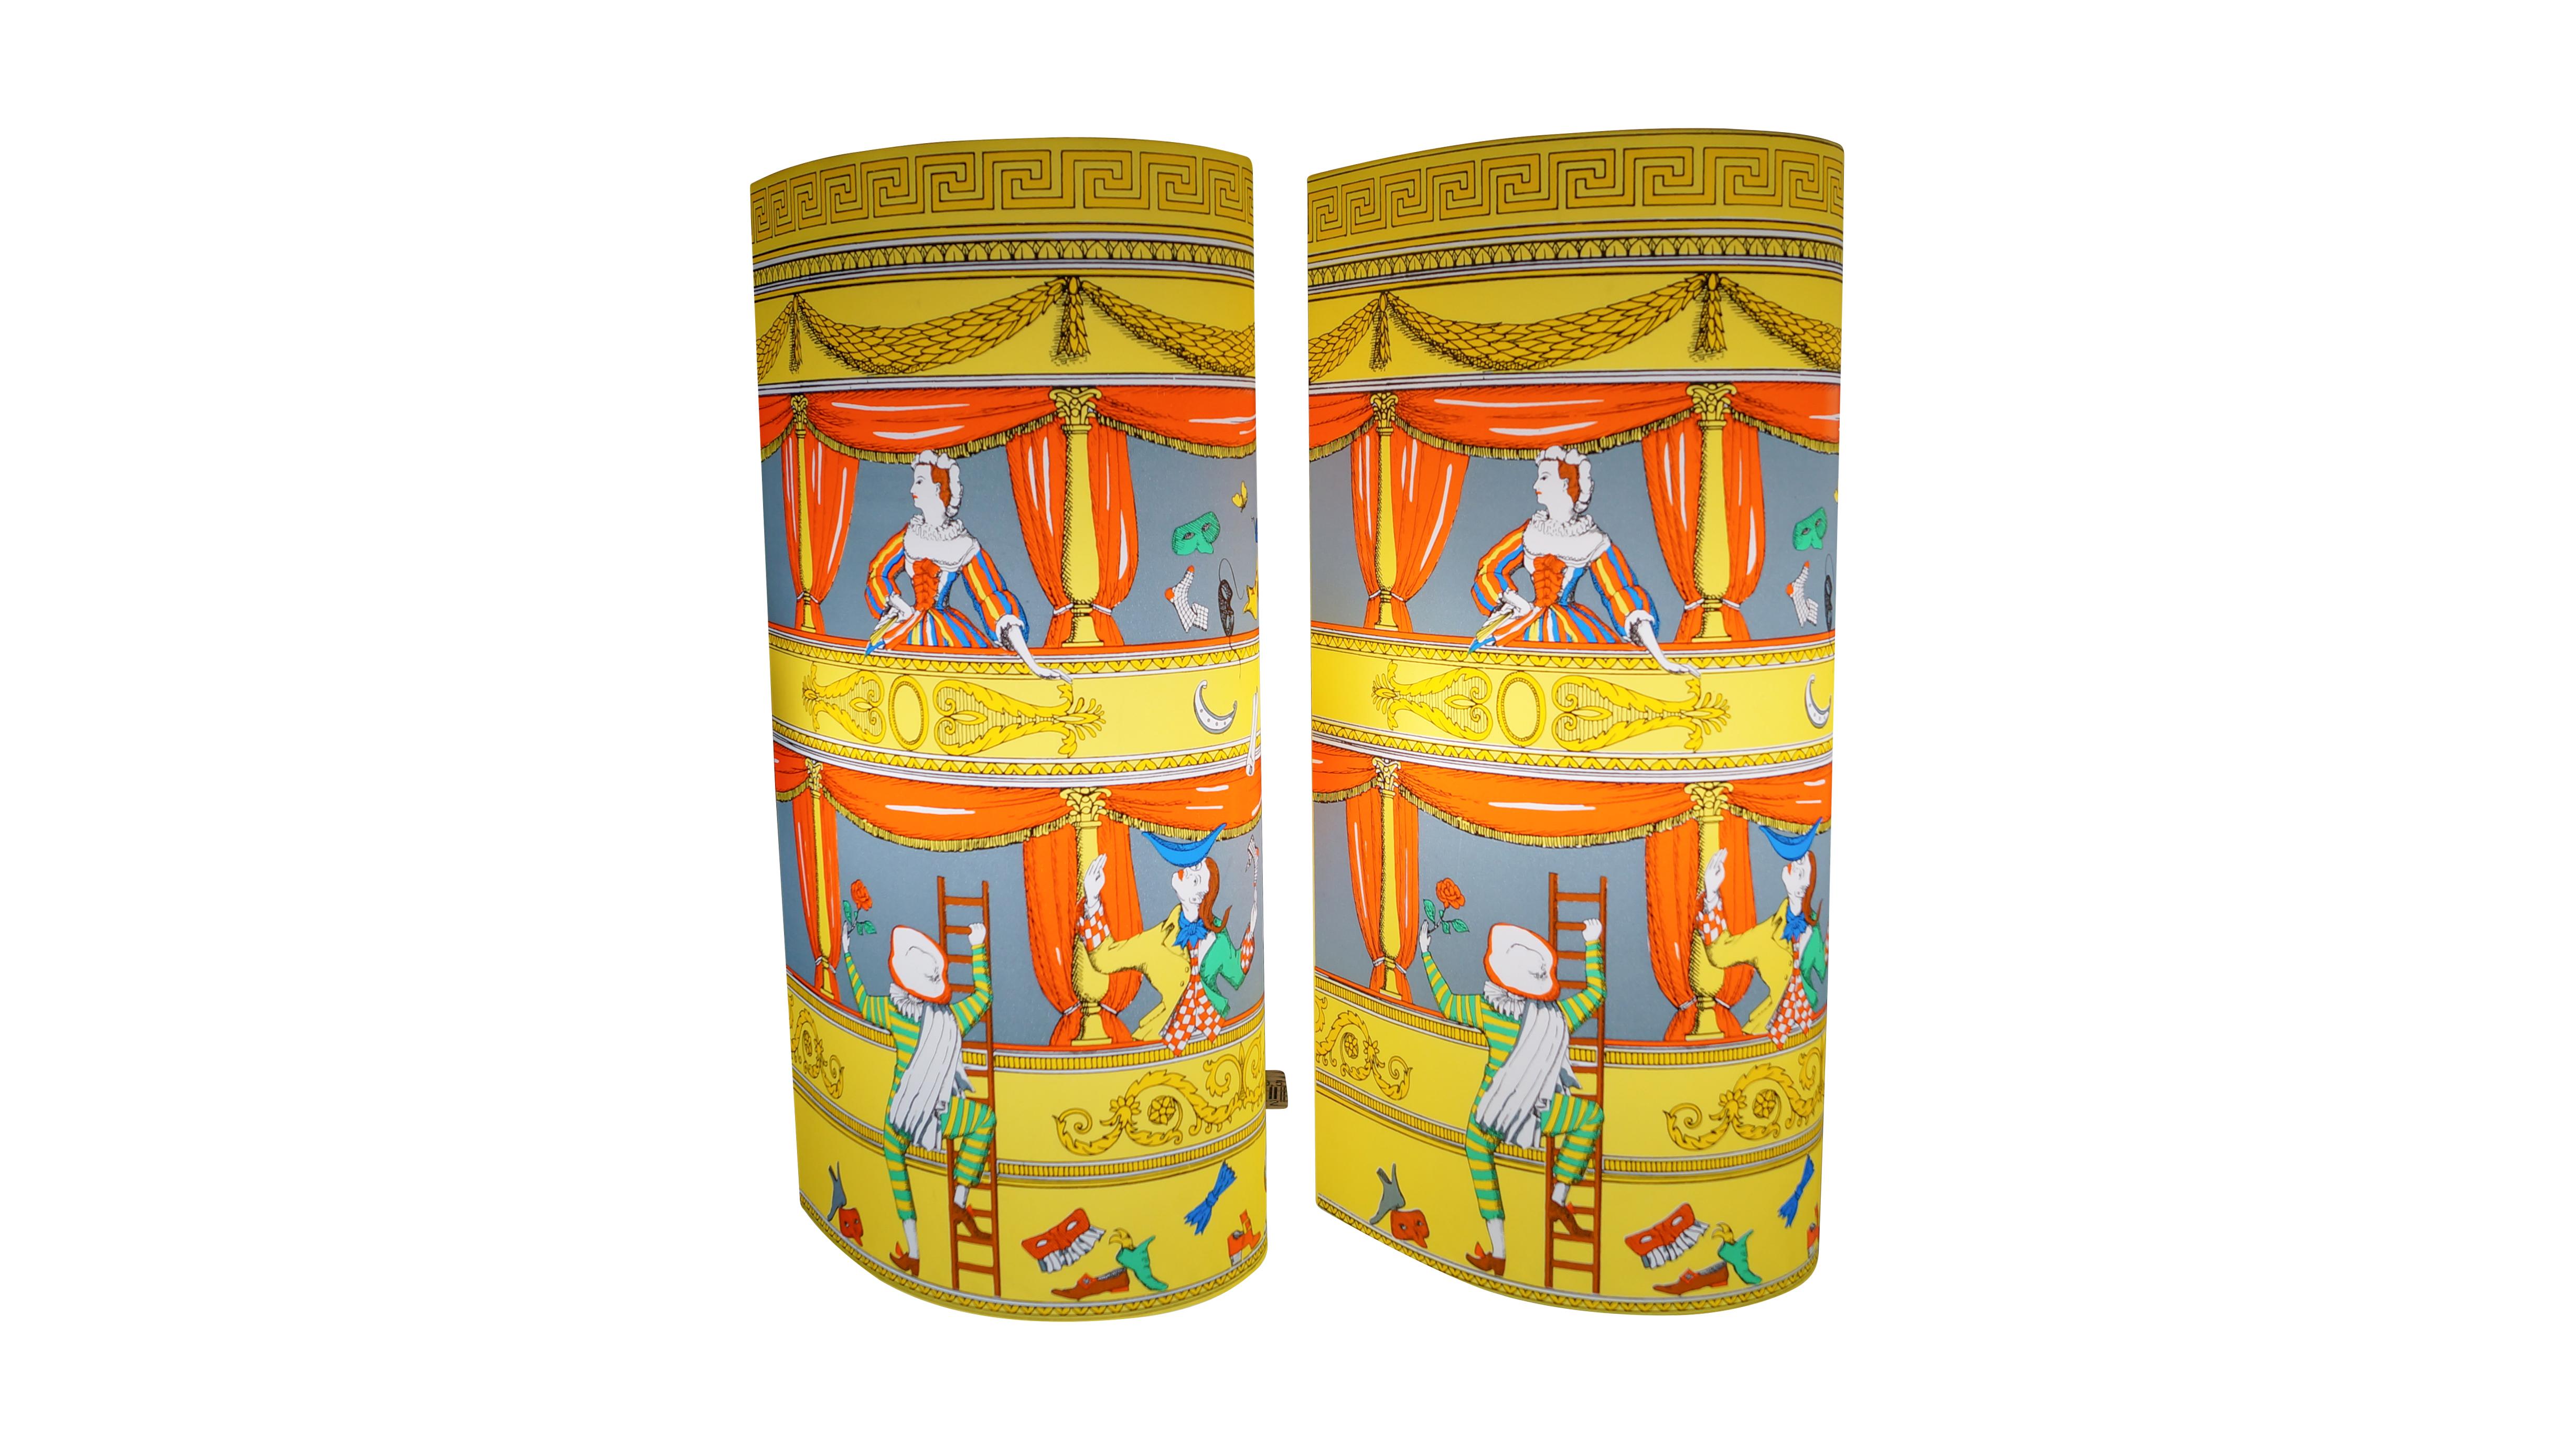 Beautiful and colored pair of table lamps by Barnaba Fornasetti “Commedia Italiano Media”
Printed and colored Perspex
Made by Fornasetti and Antonangeli Iluminazione. Paderno Dugano.
Italy, period 1995
Measures: H 33 cm x W 12 cm x D 16 cm.